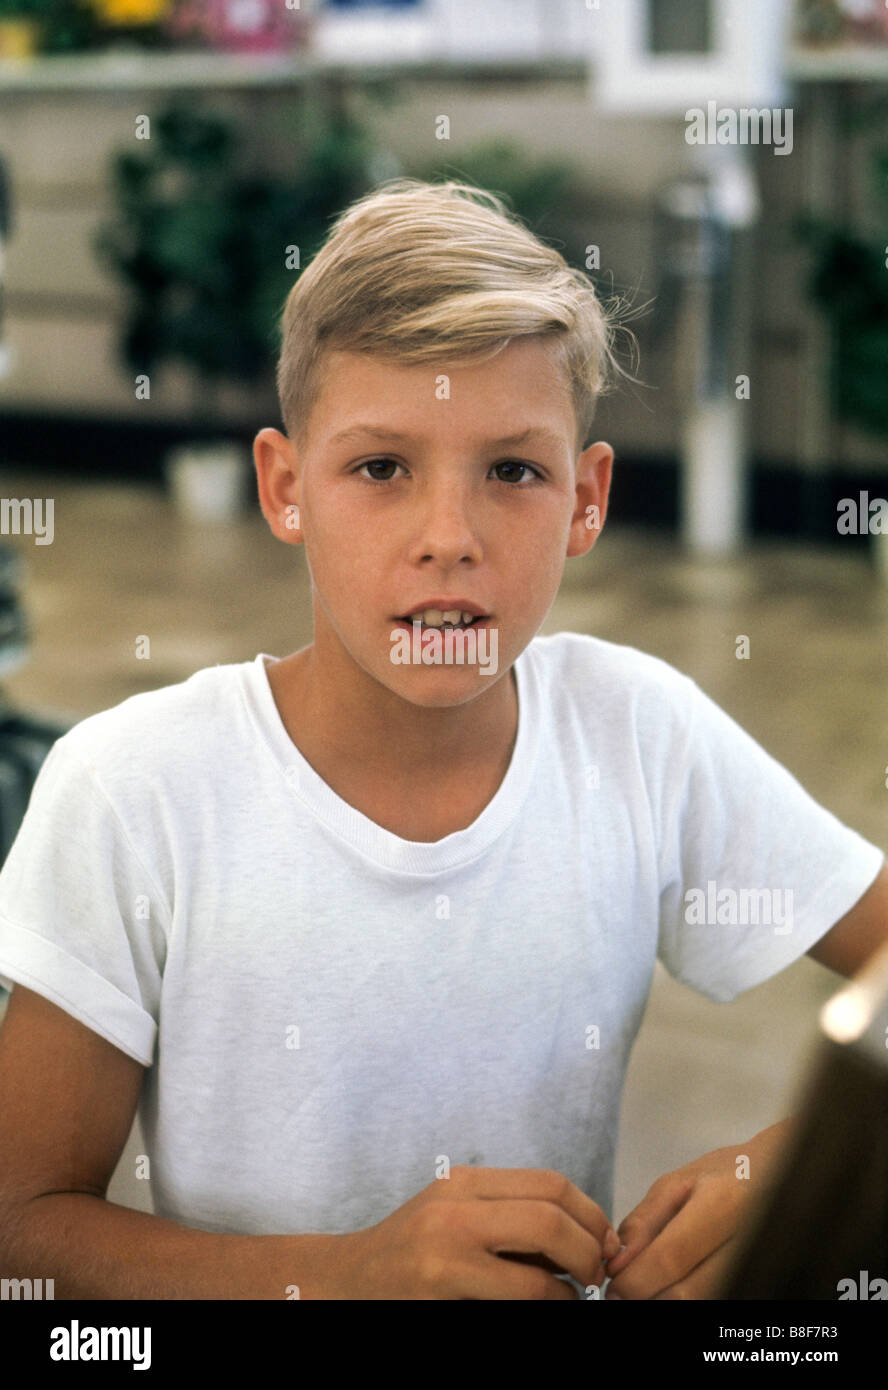 Blond boy in white T shirt looks intently at camera Stock Photo